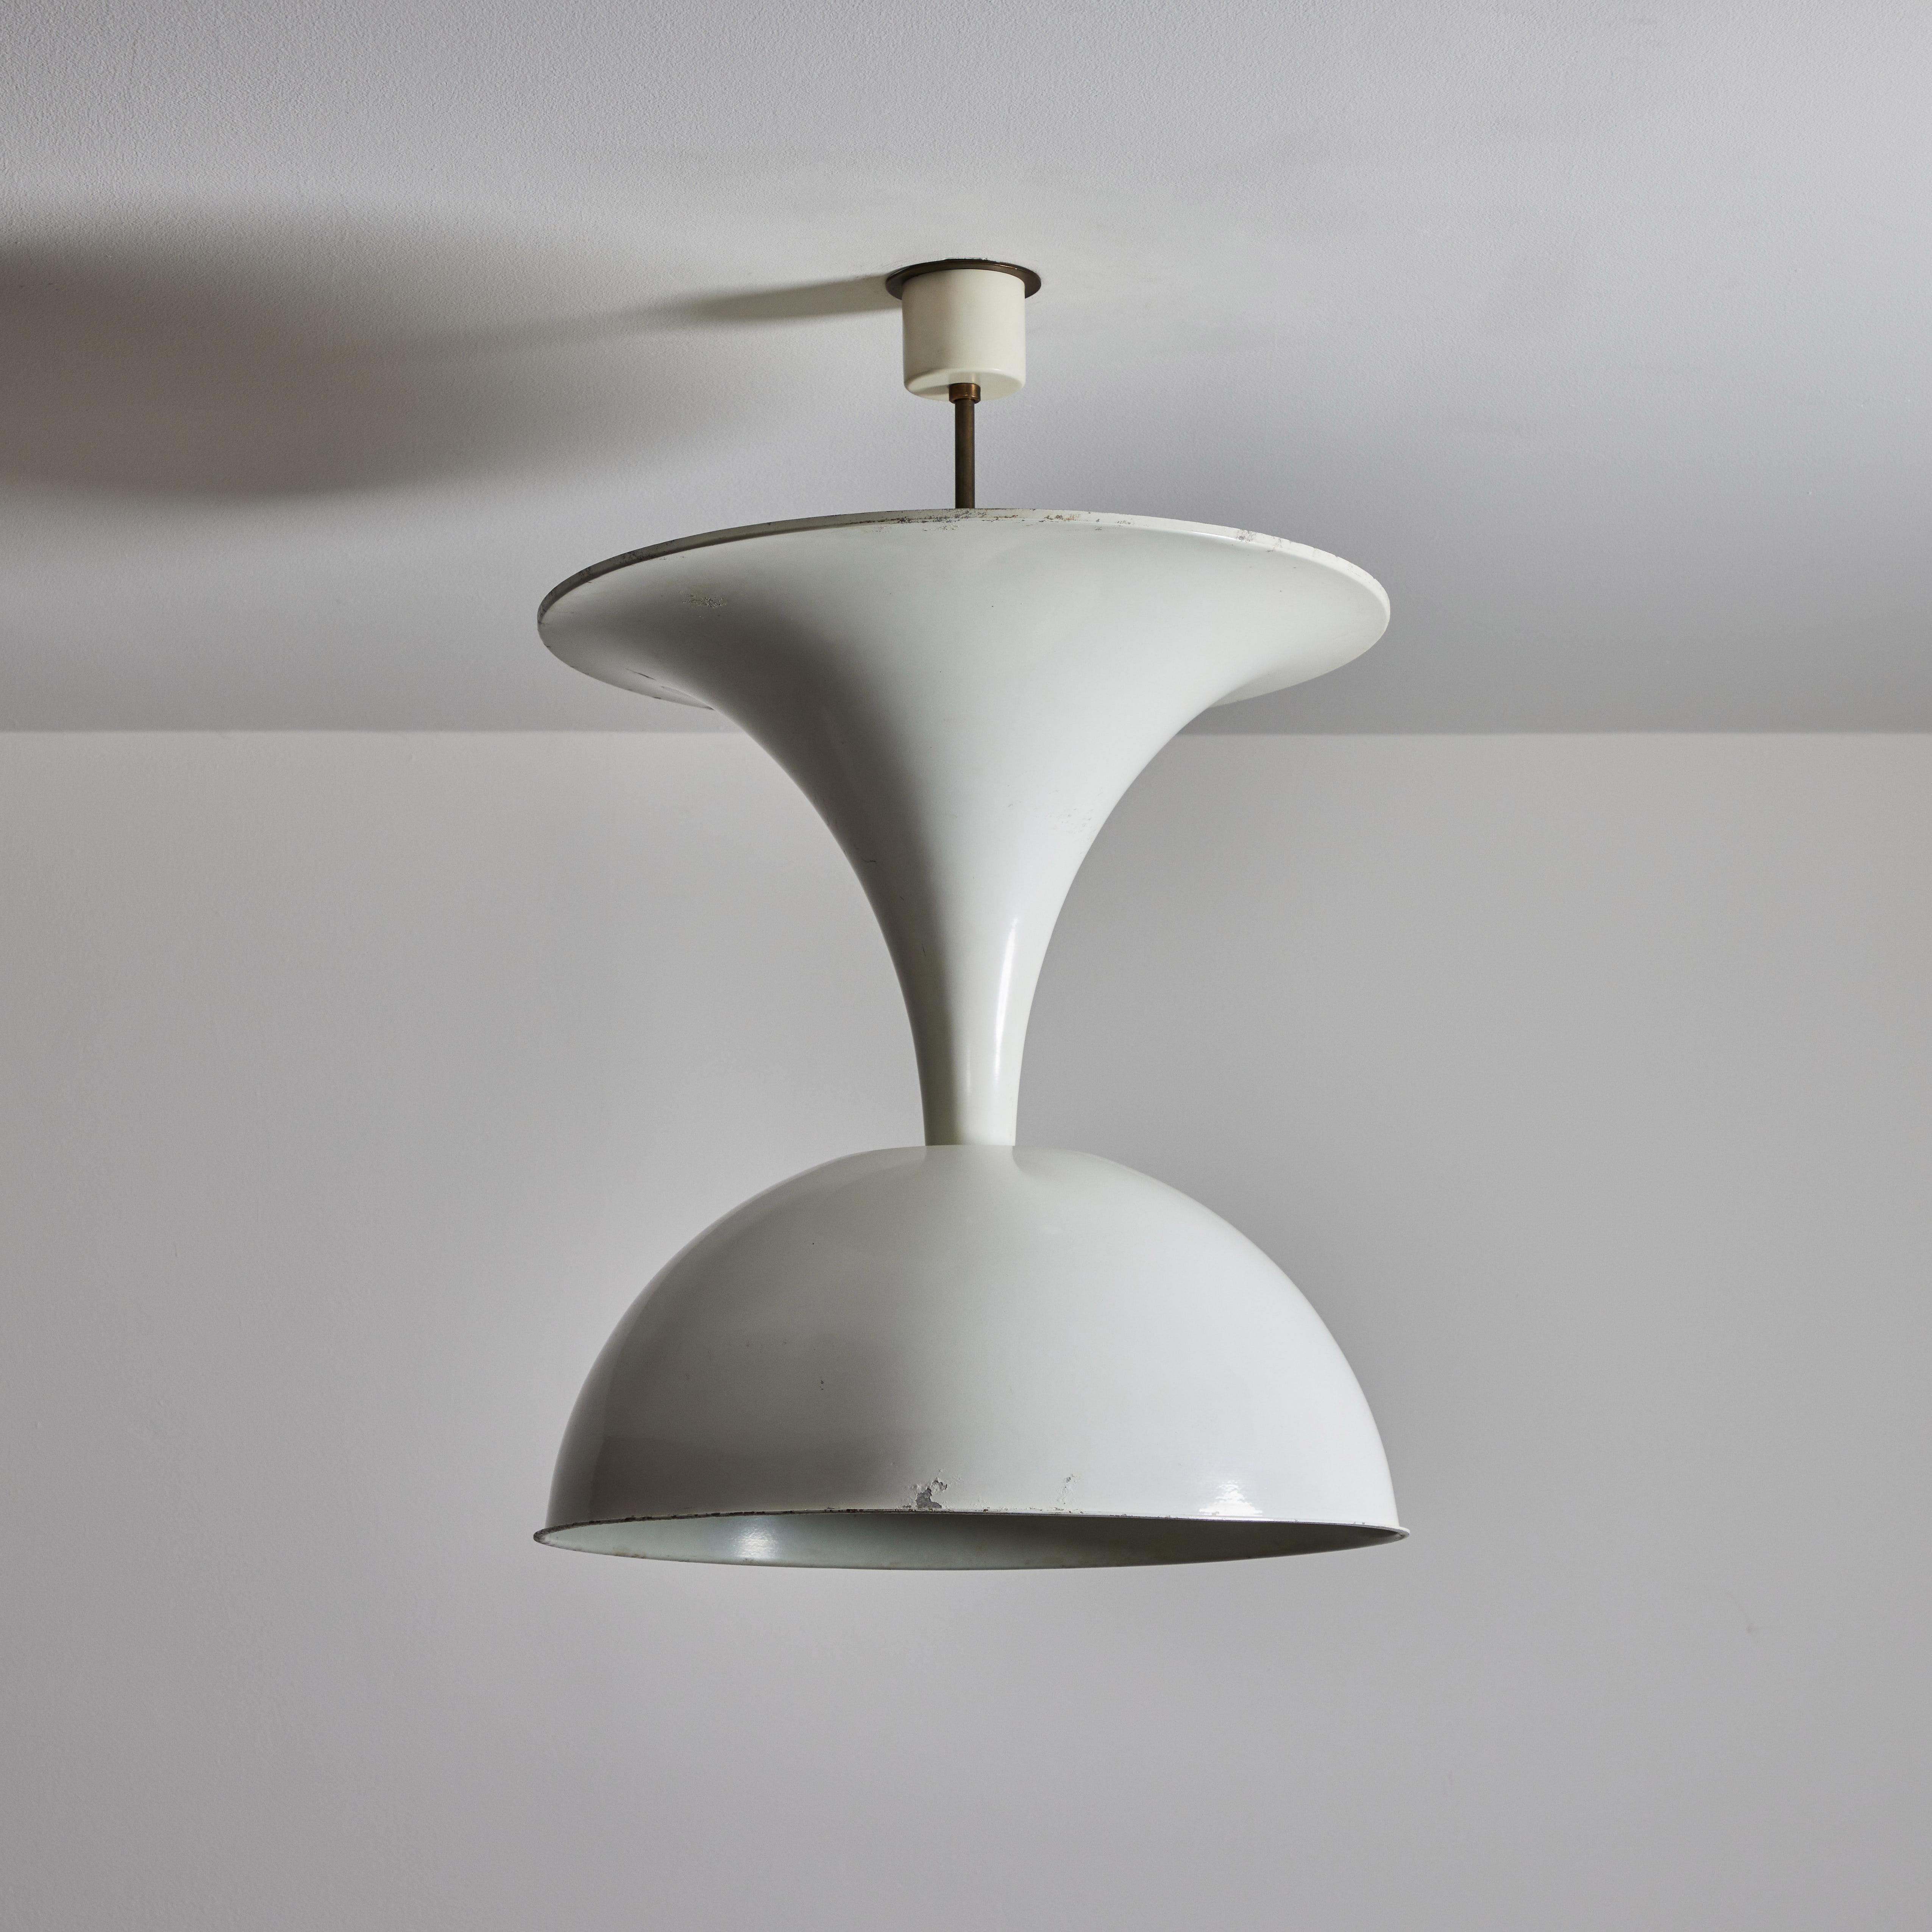 Late 20th Century Sculptural Ceiling Light by Valenti